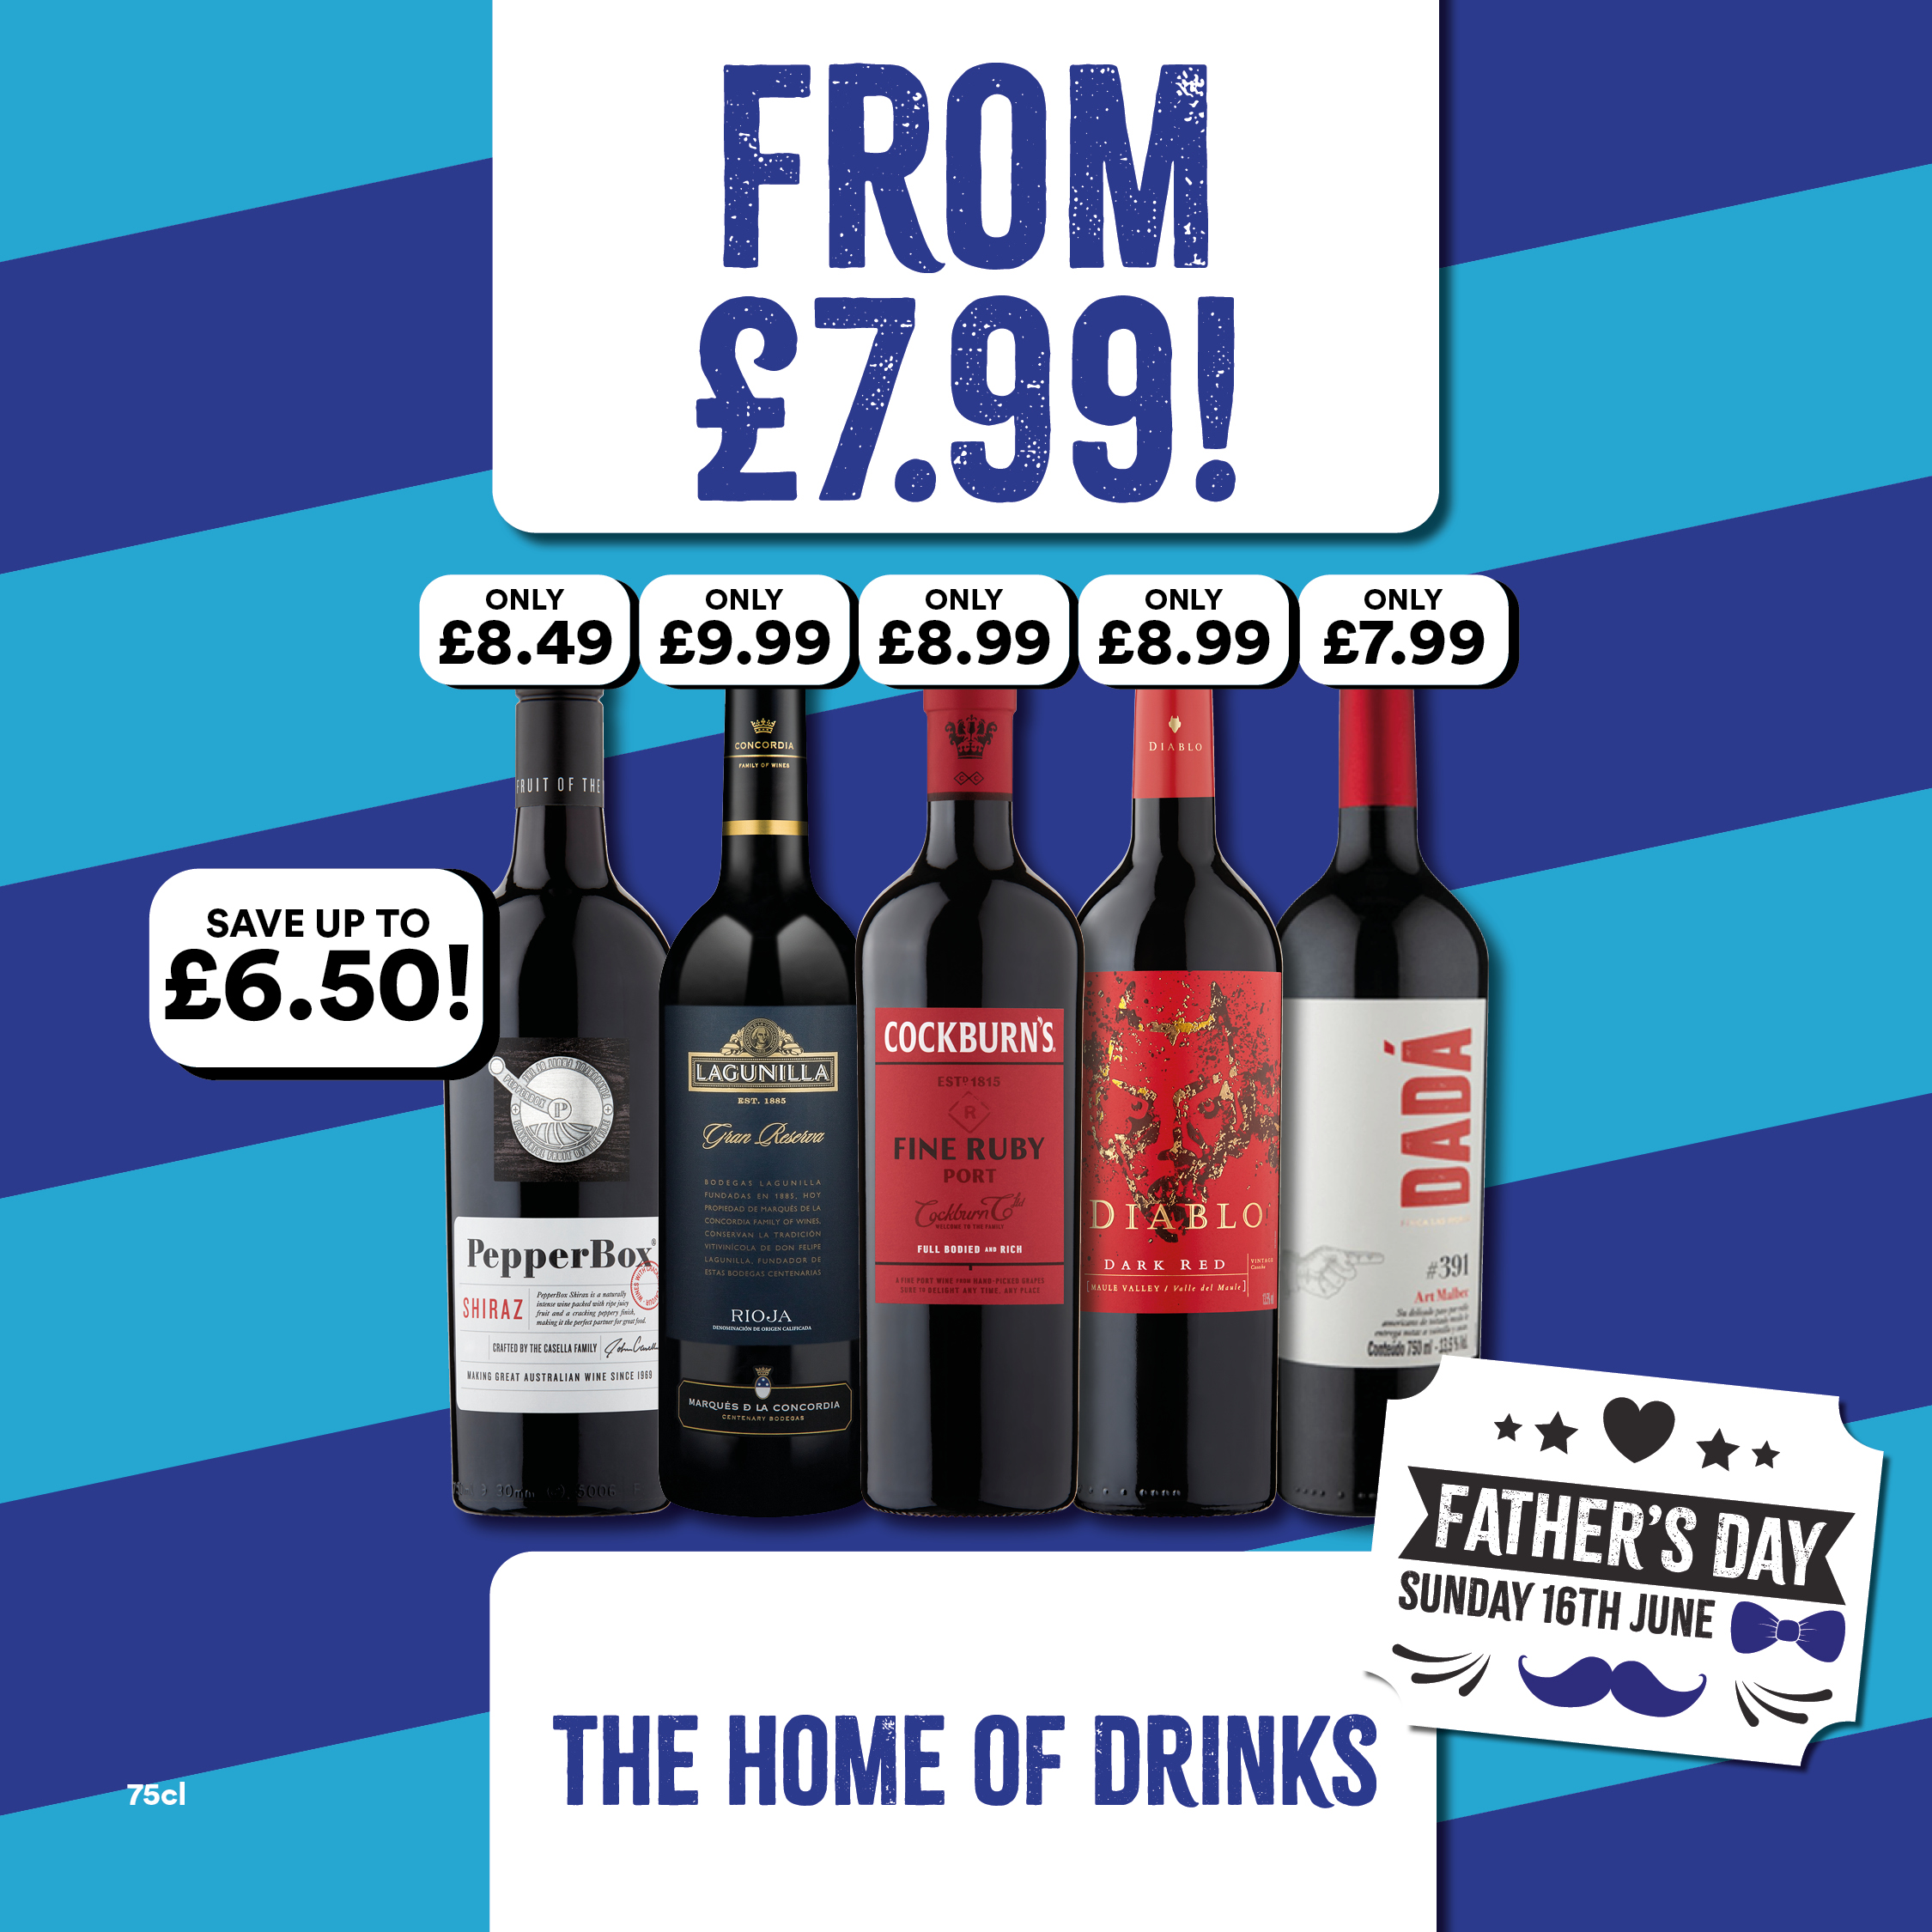 From £7.99 on selected wines Bargain Booze Liverpool 01515 211098